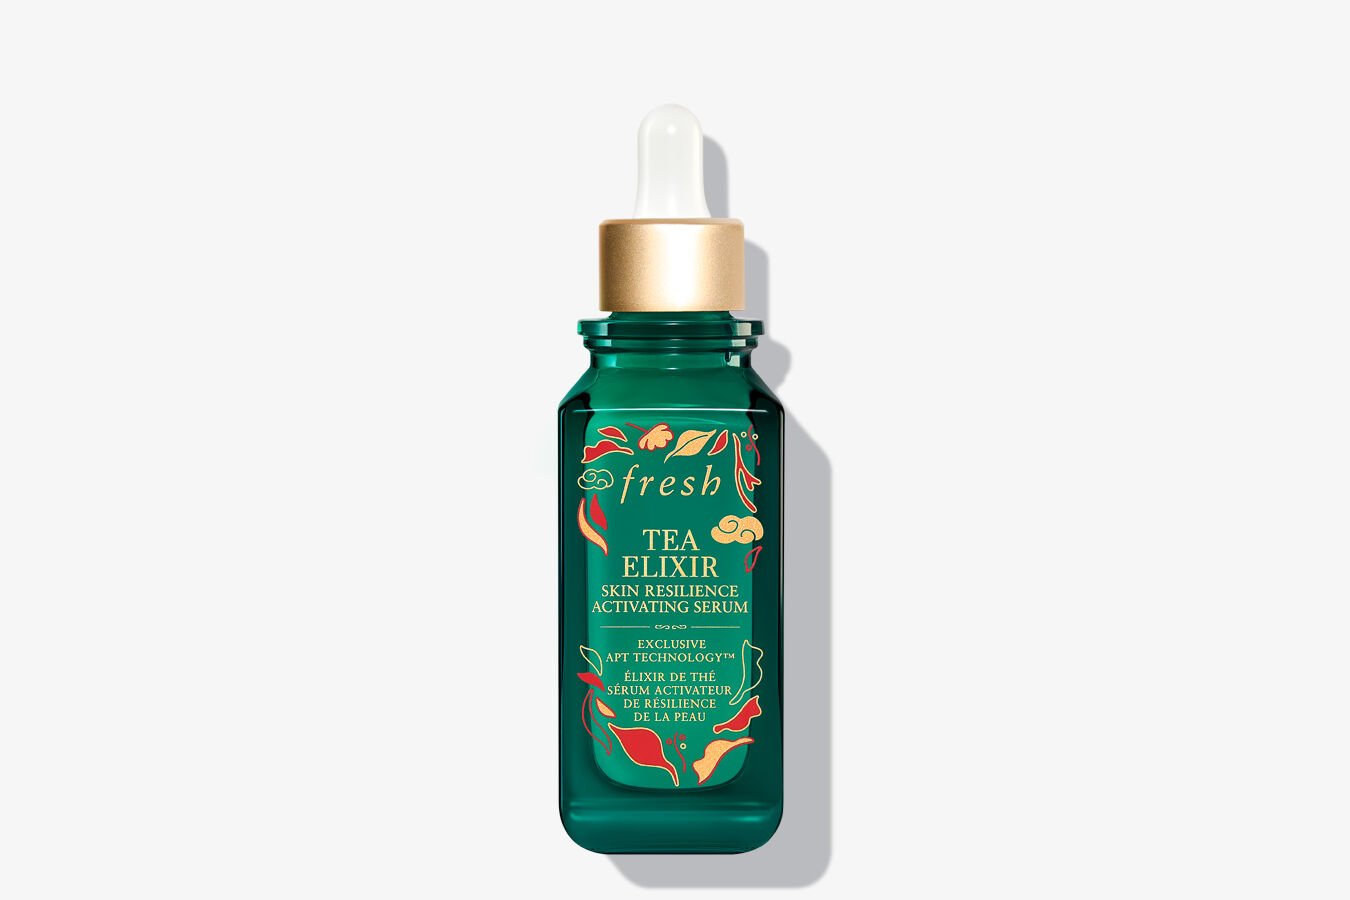 Limited-Edition Tea Elixir Skin Resilience Activating Serum